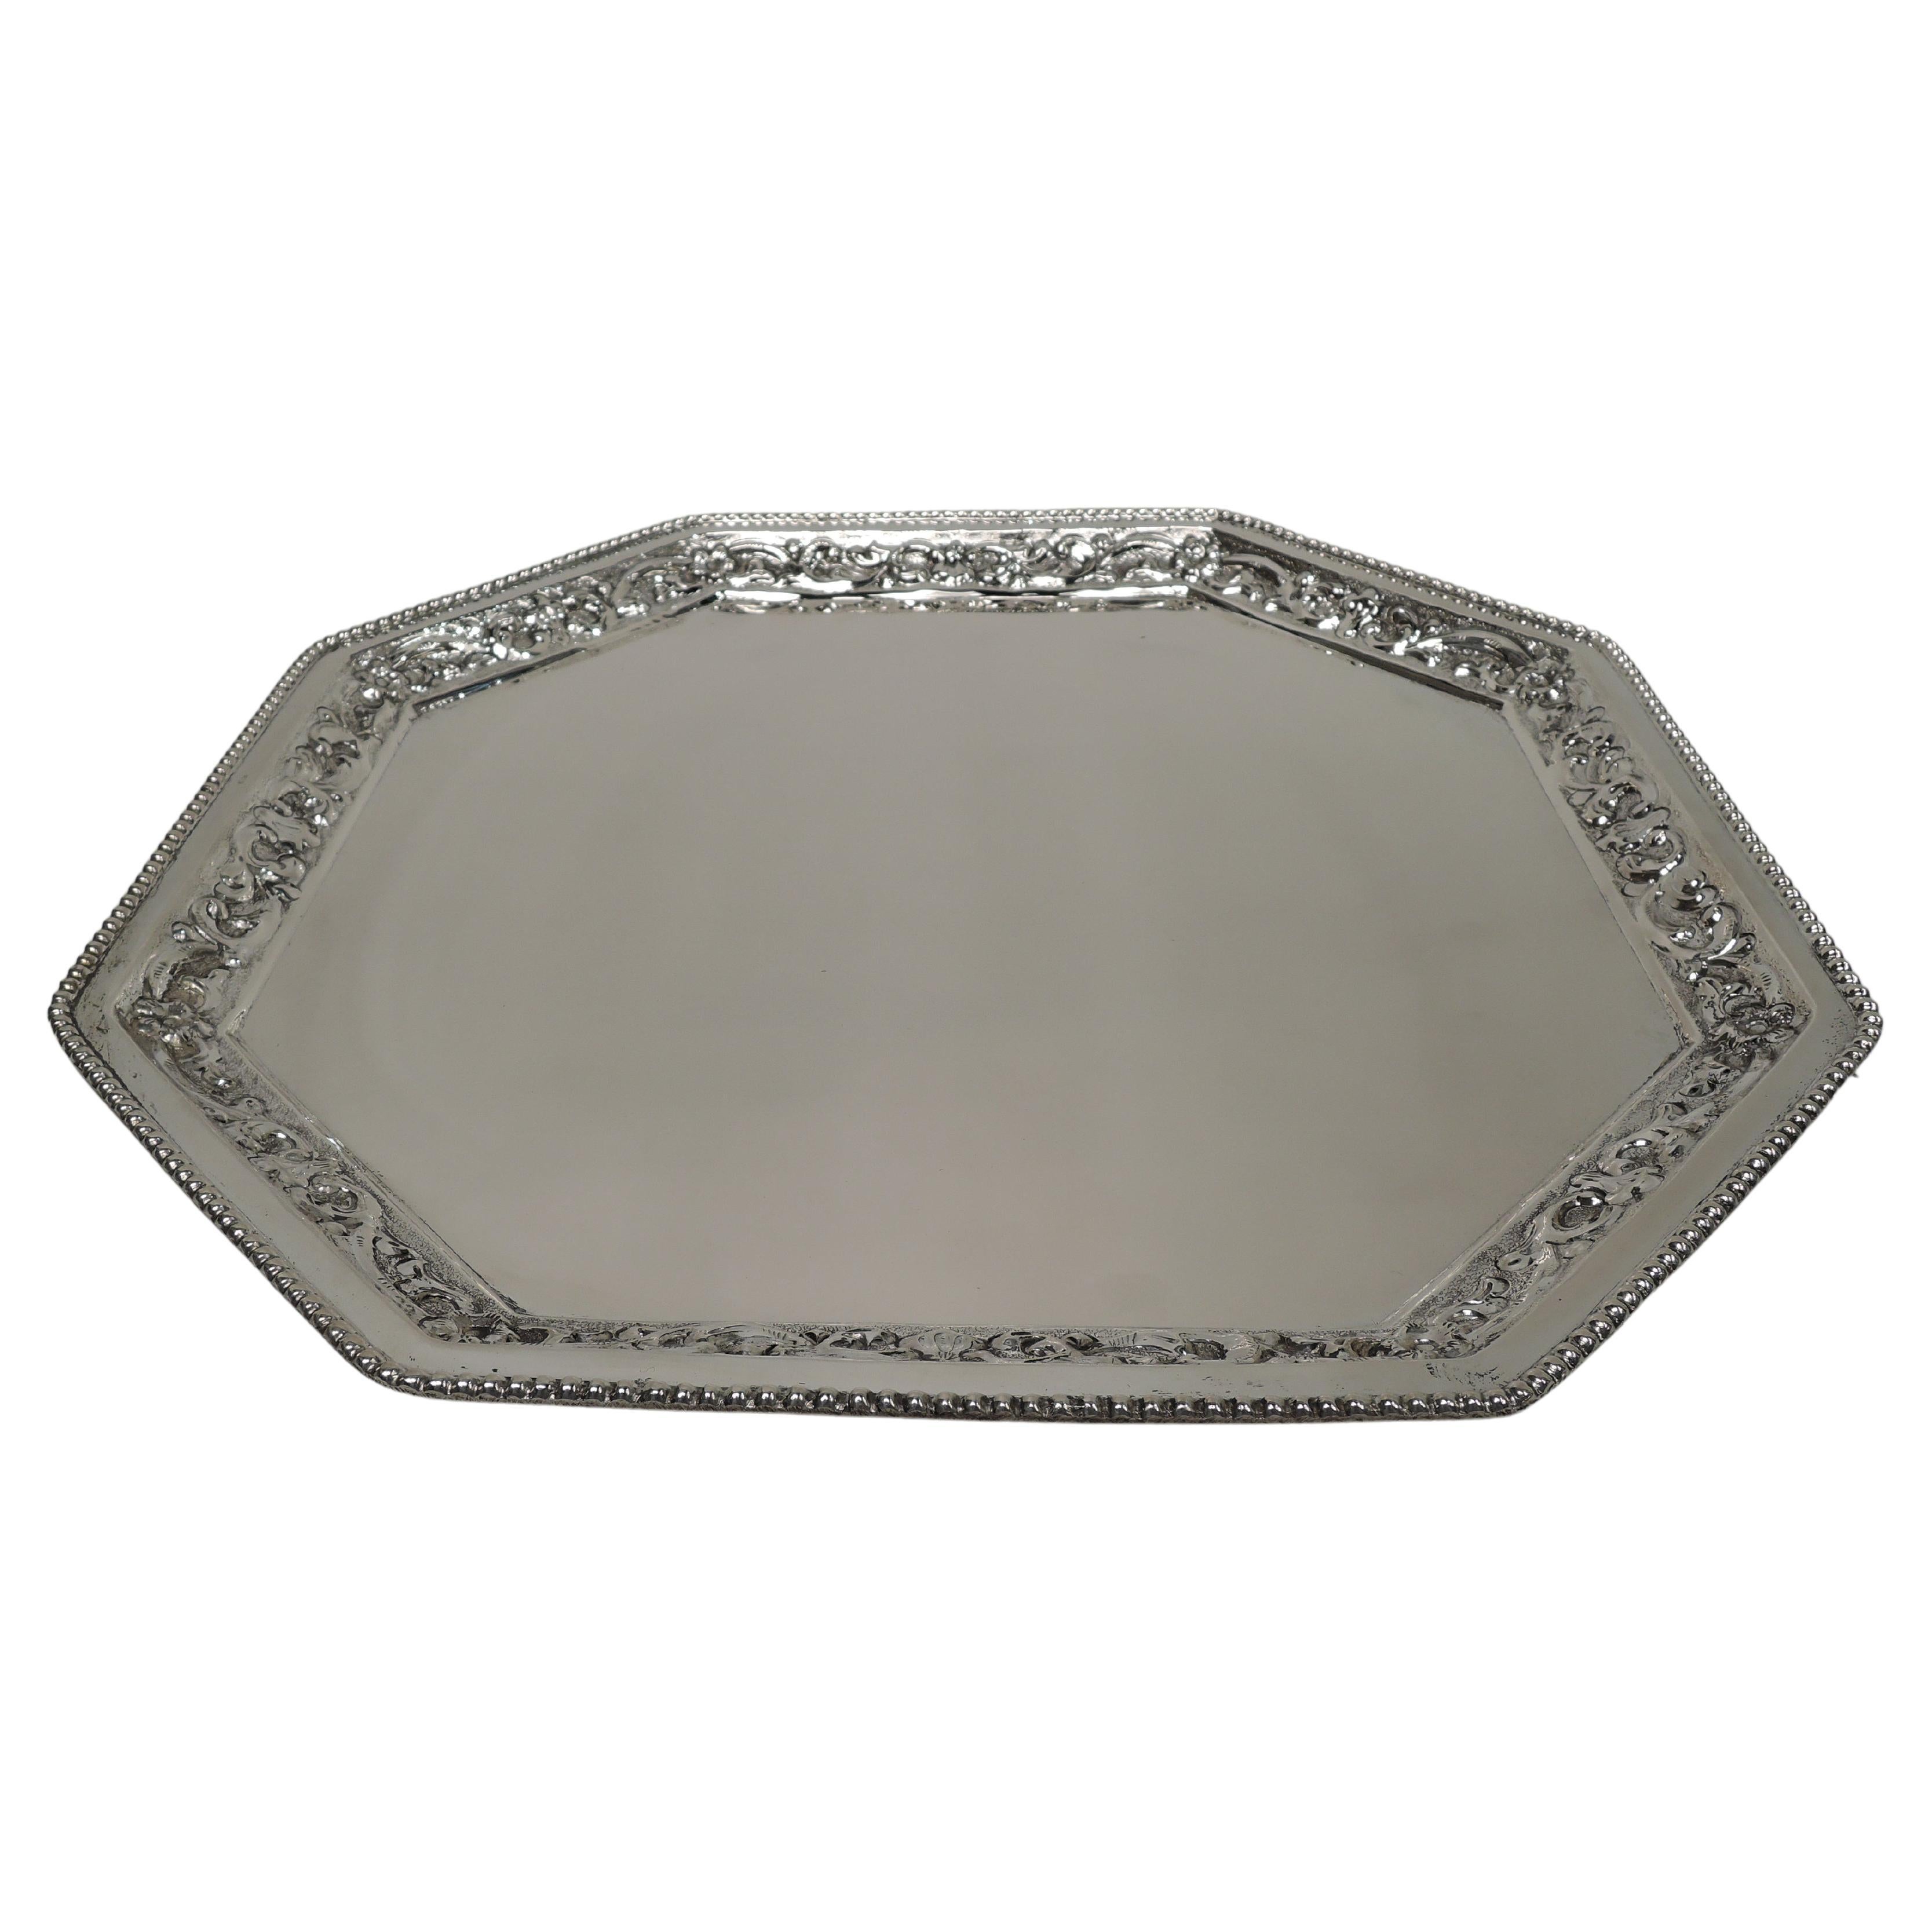 Pretty Classical Silver Octagonal Tray with Beading & Scrollwork For Sale